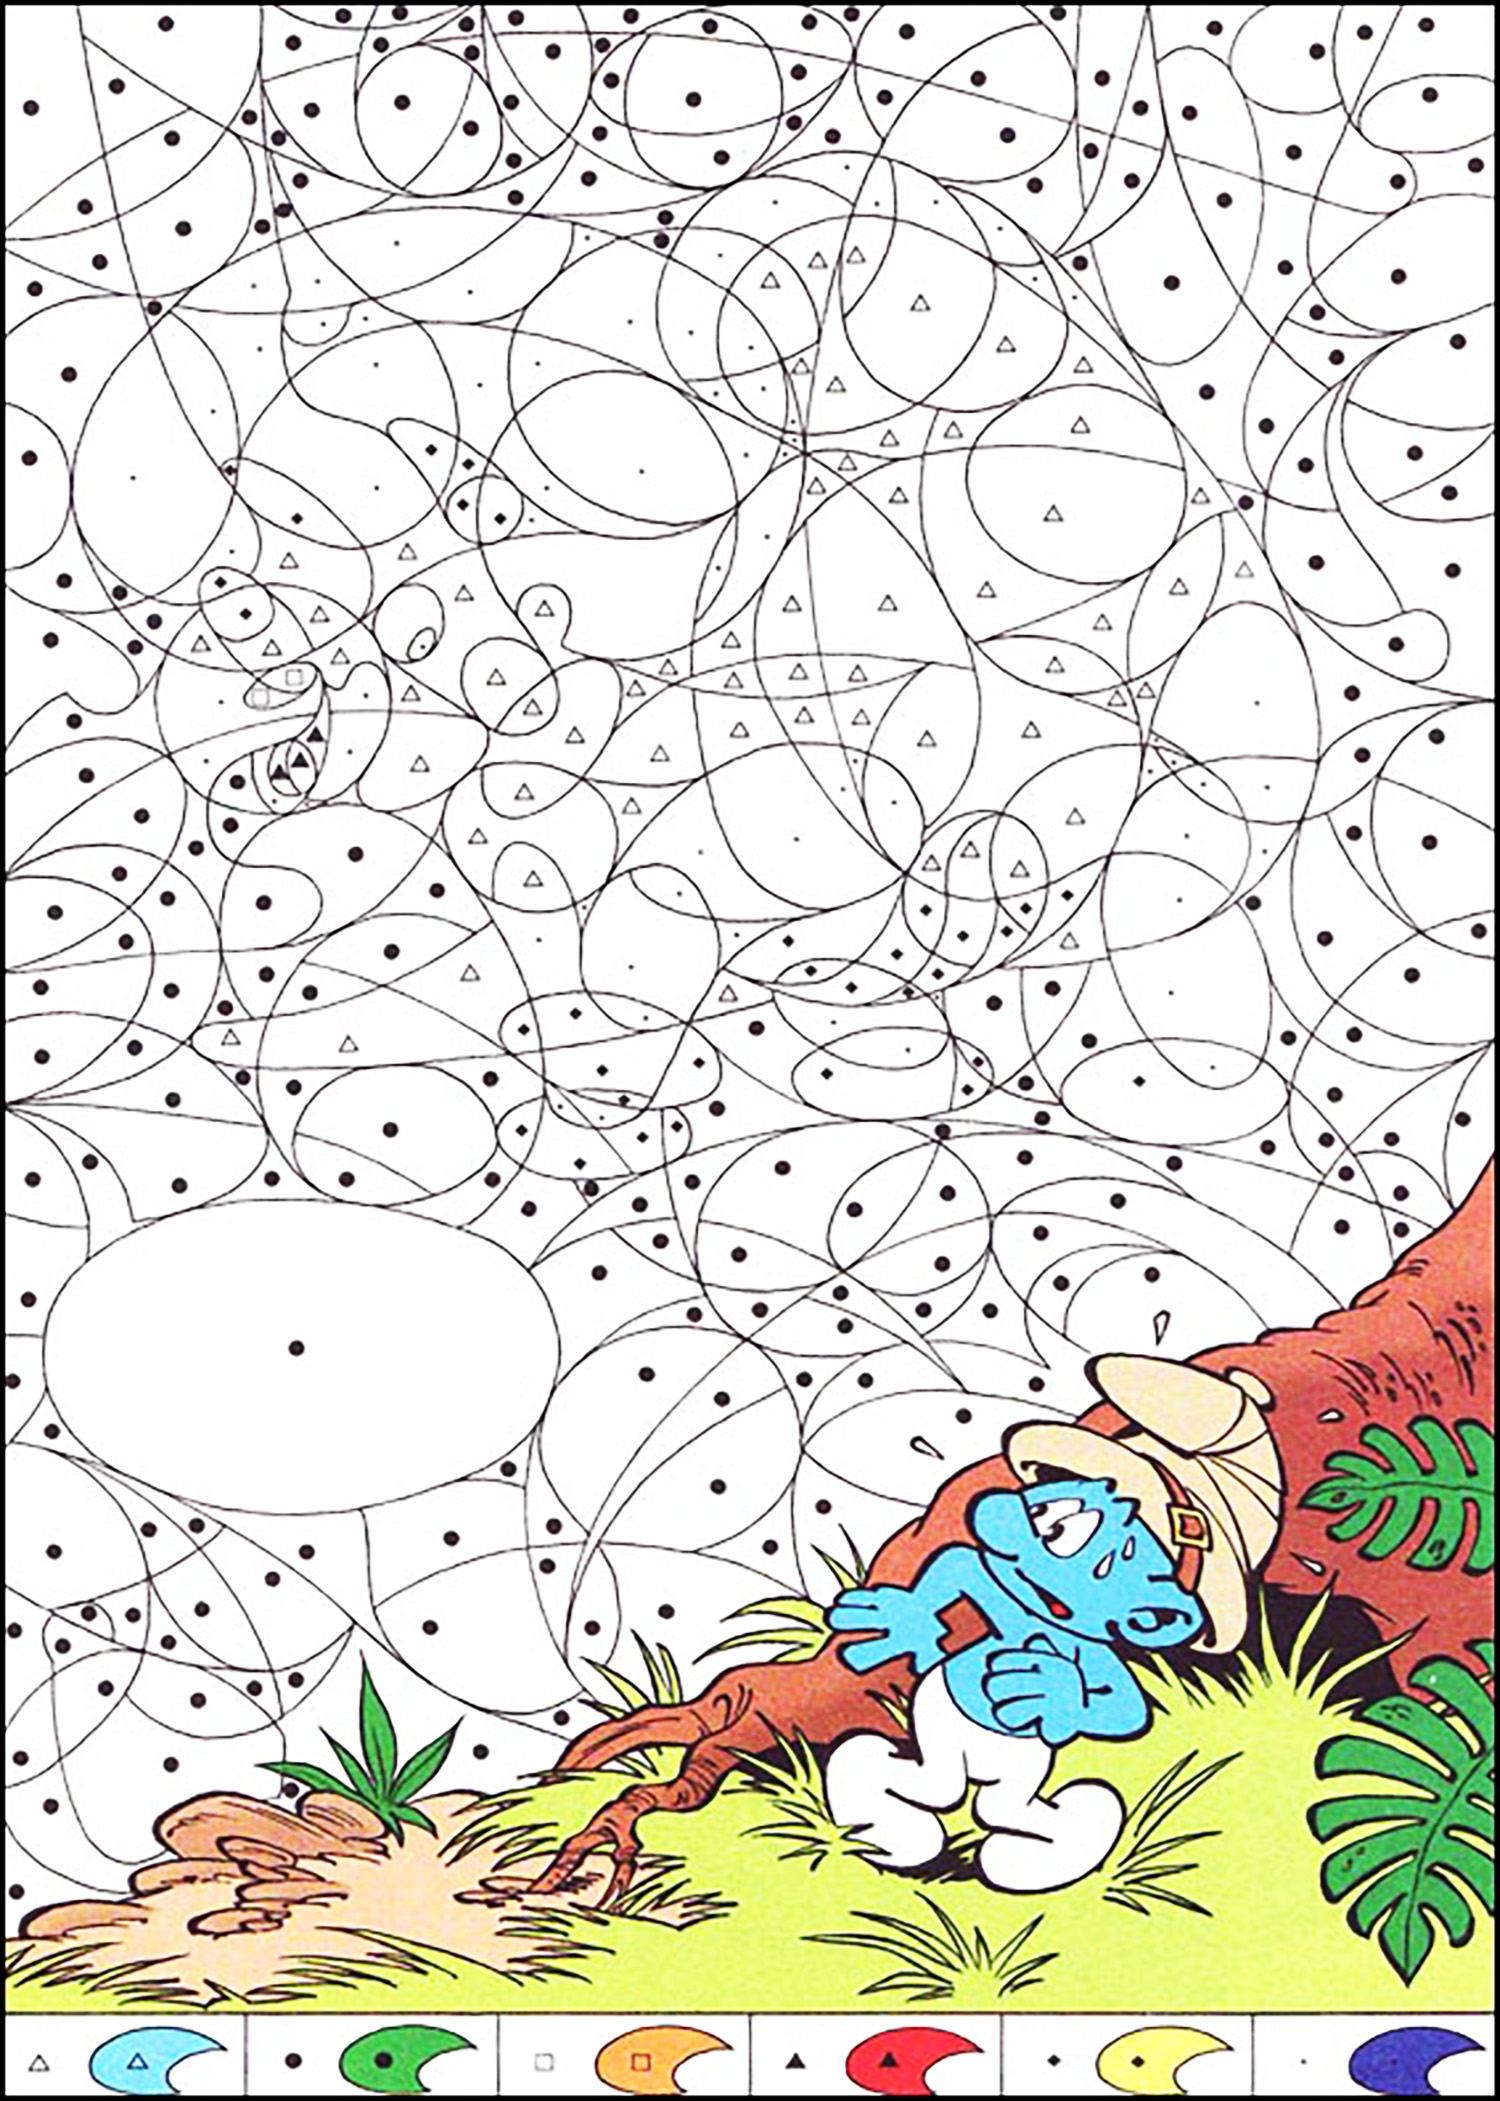 Magical coloring page for kids with the smurfs